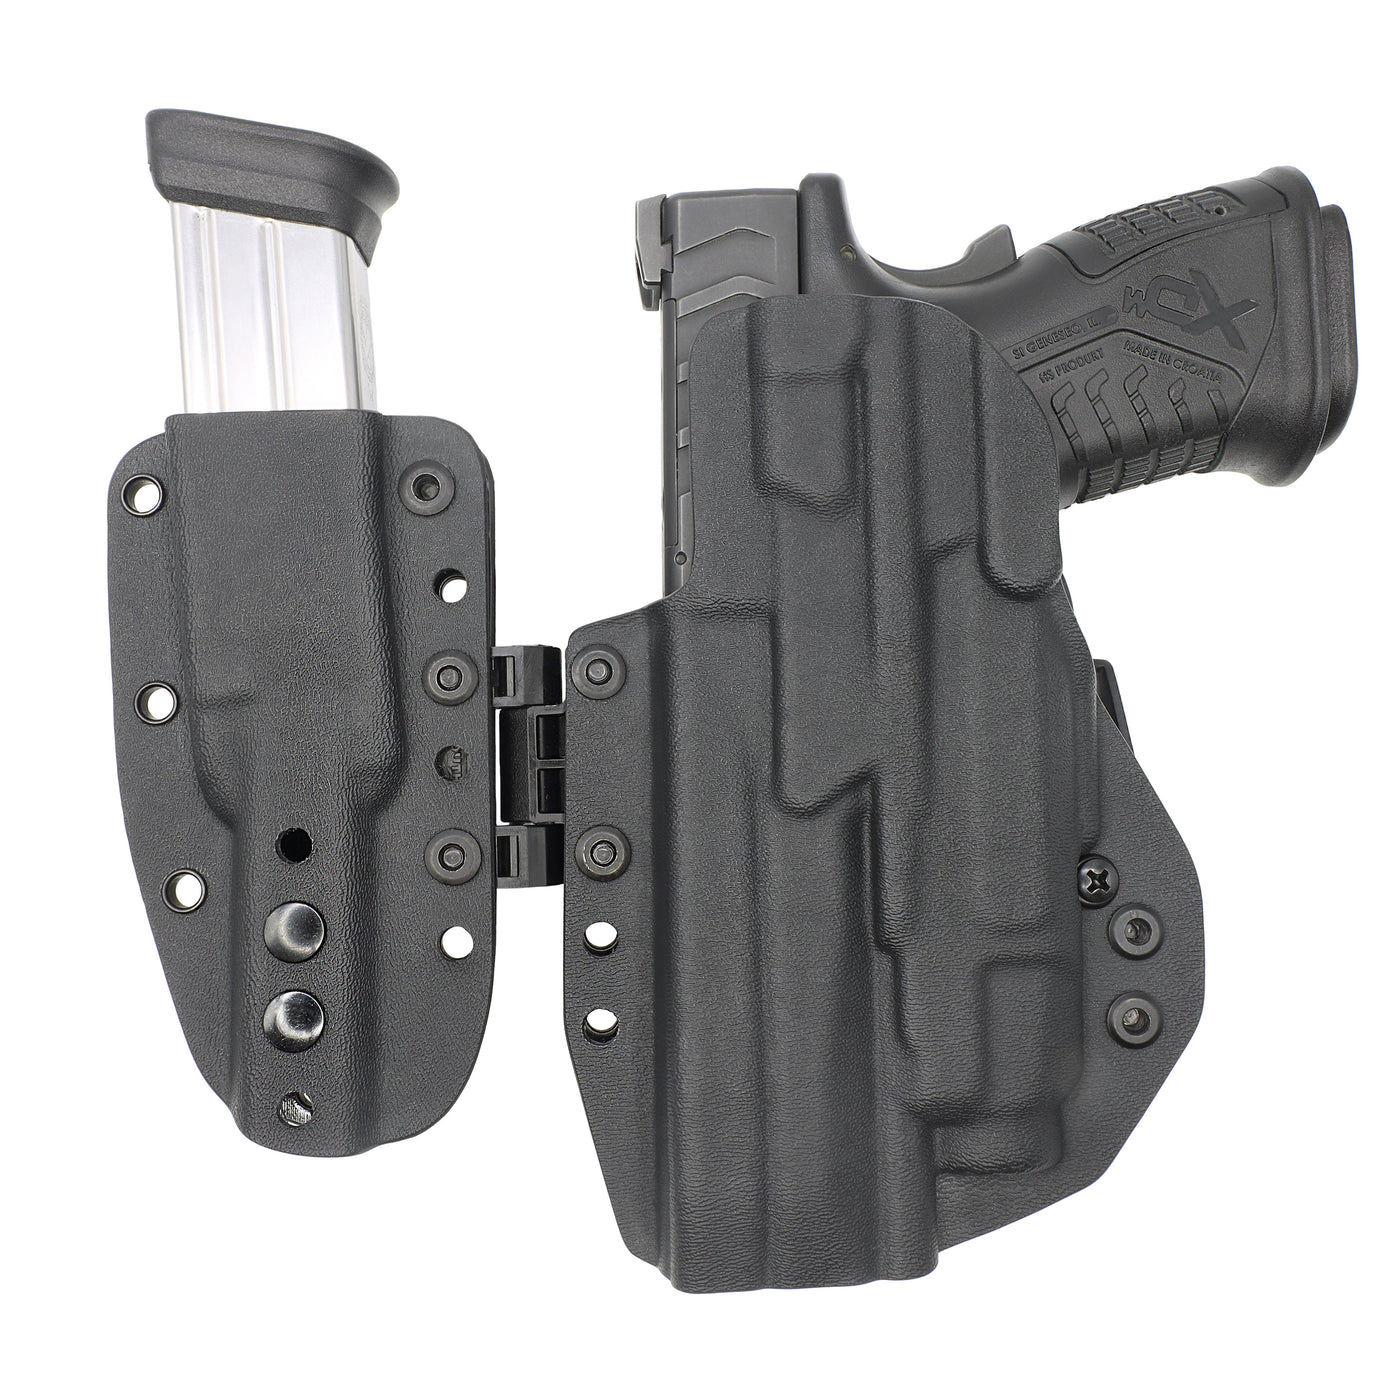 C&G Holsters Quickship AIWB MOD1 LIMA Springfield XDM Streamlight TLR7 holstered back view